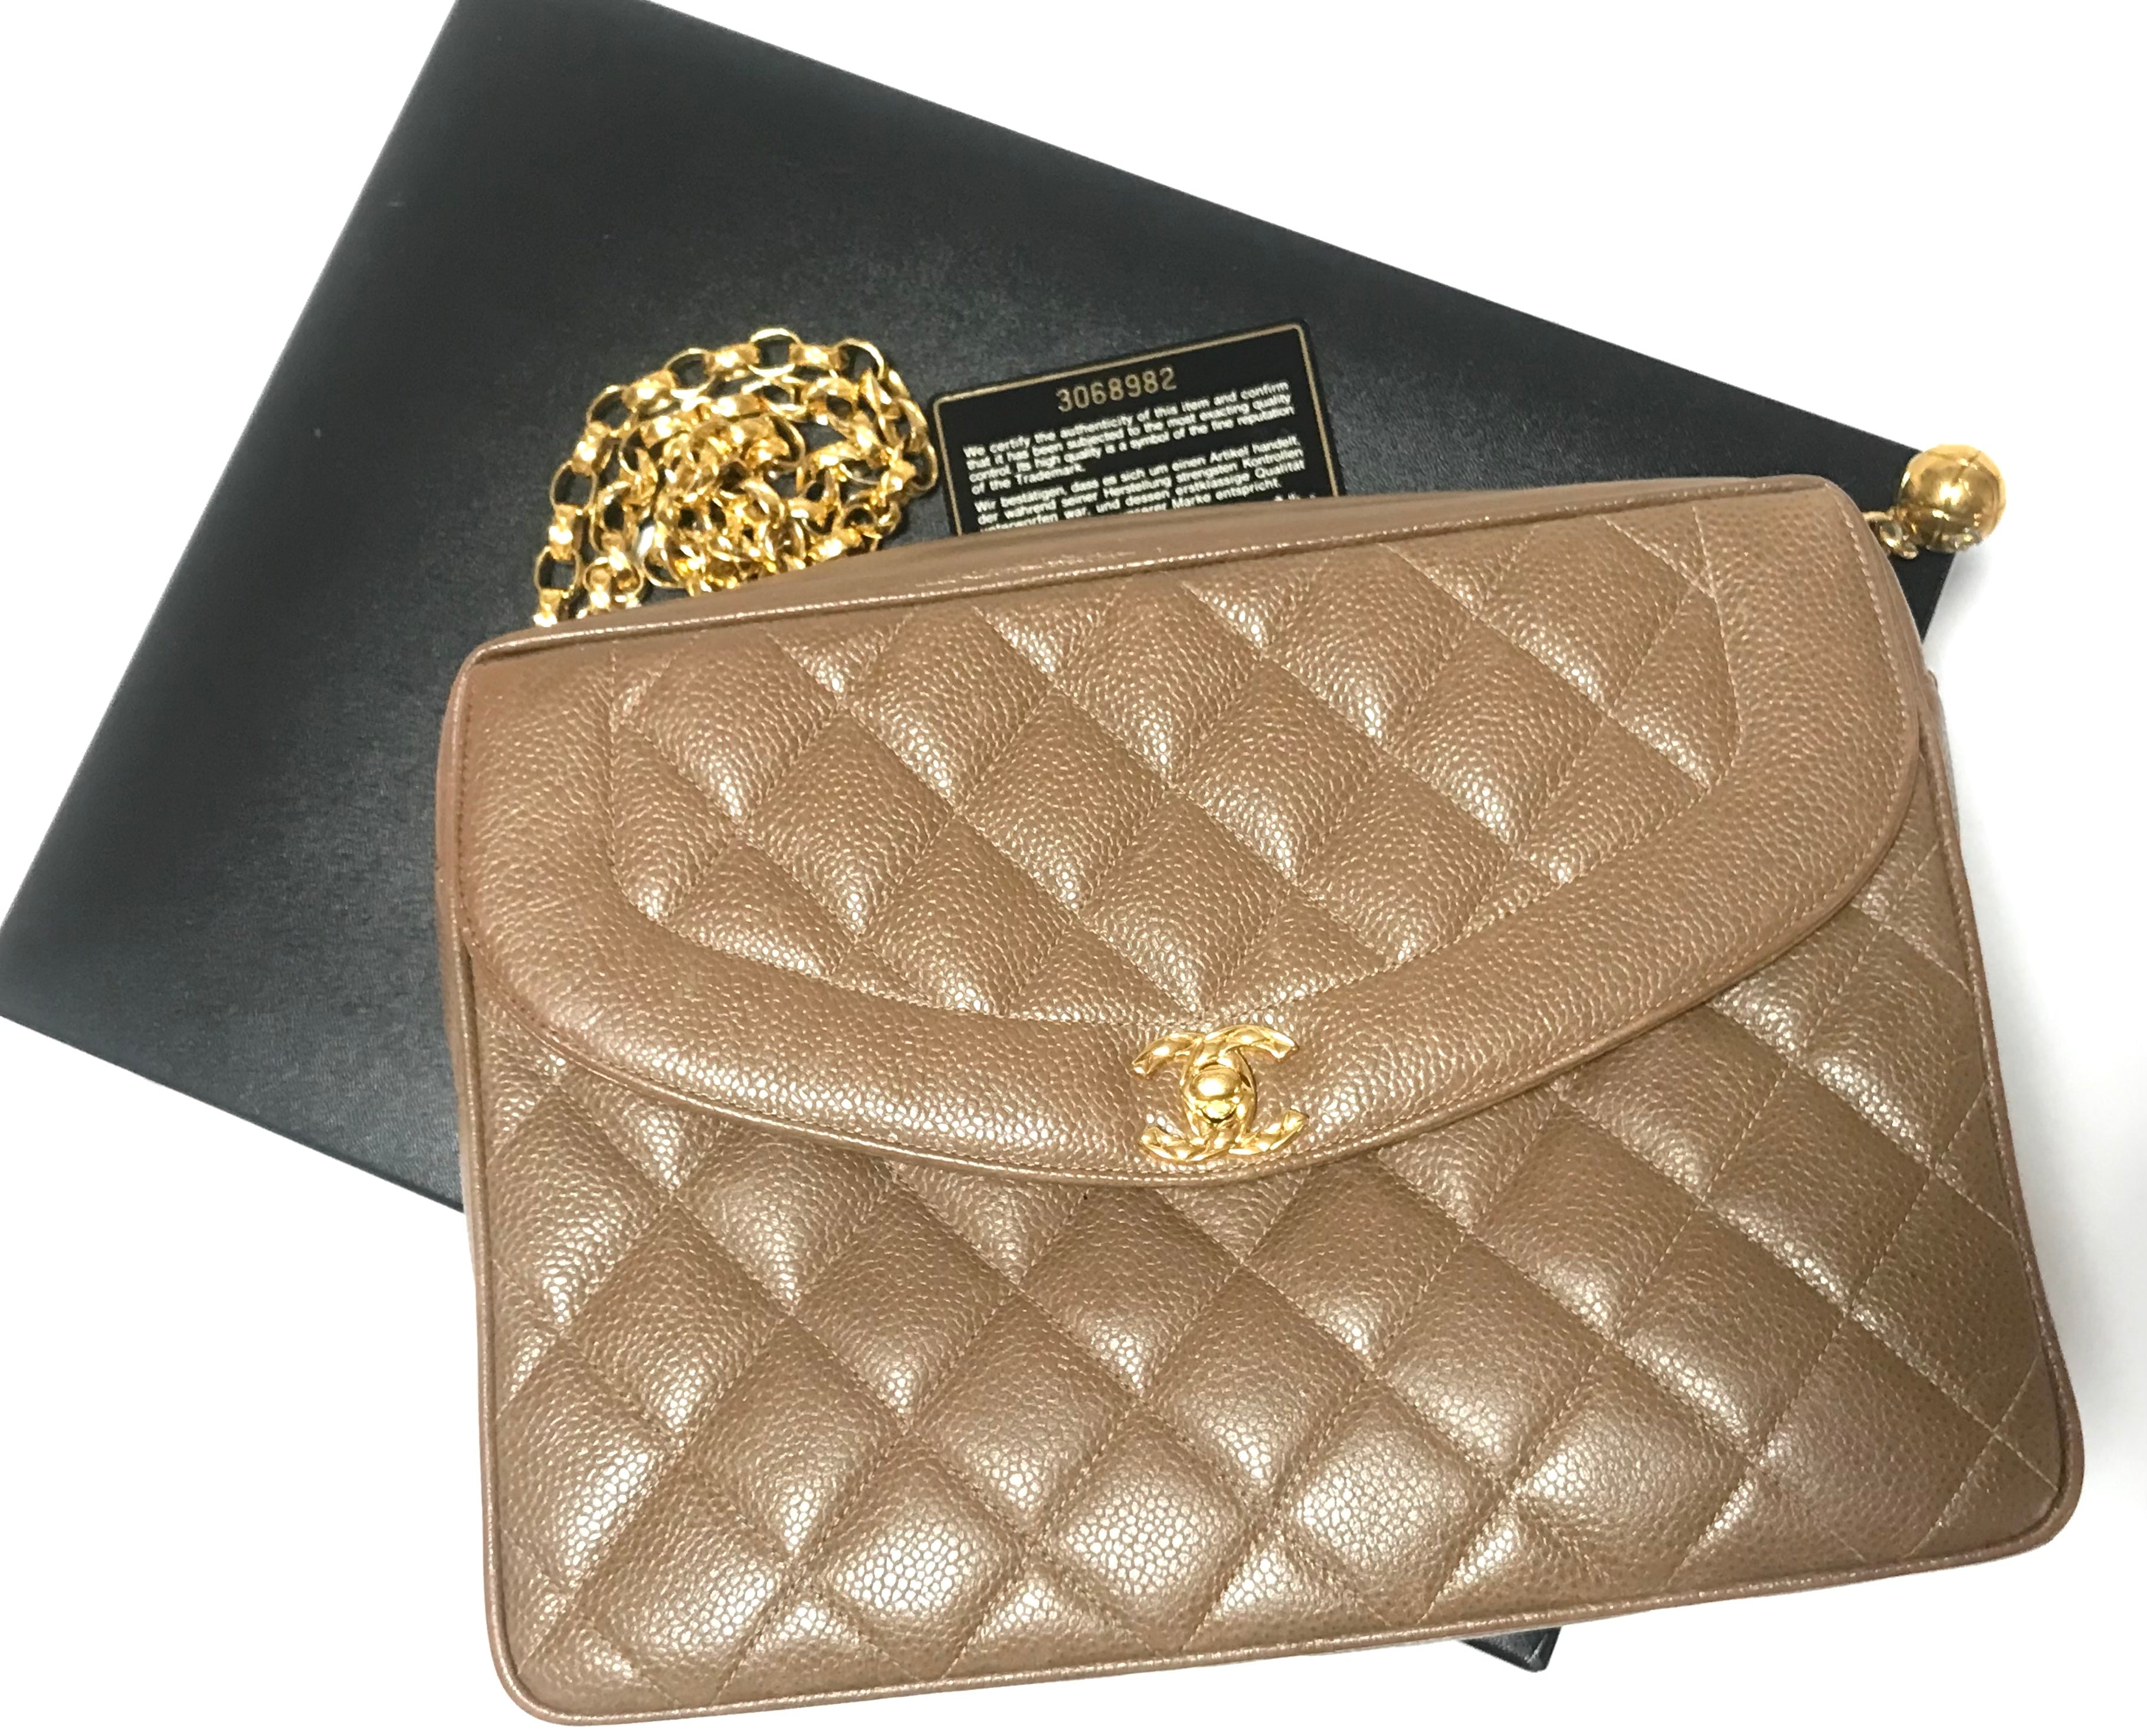 Vintage CHANEL beige and black frame lambskin 2.55 classic flap should –  eNdApPi ***where you can find your favorite designer  vintages..authentic, affordable, and lovable.